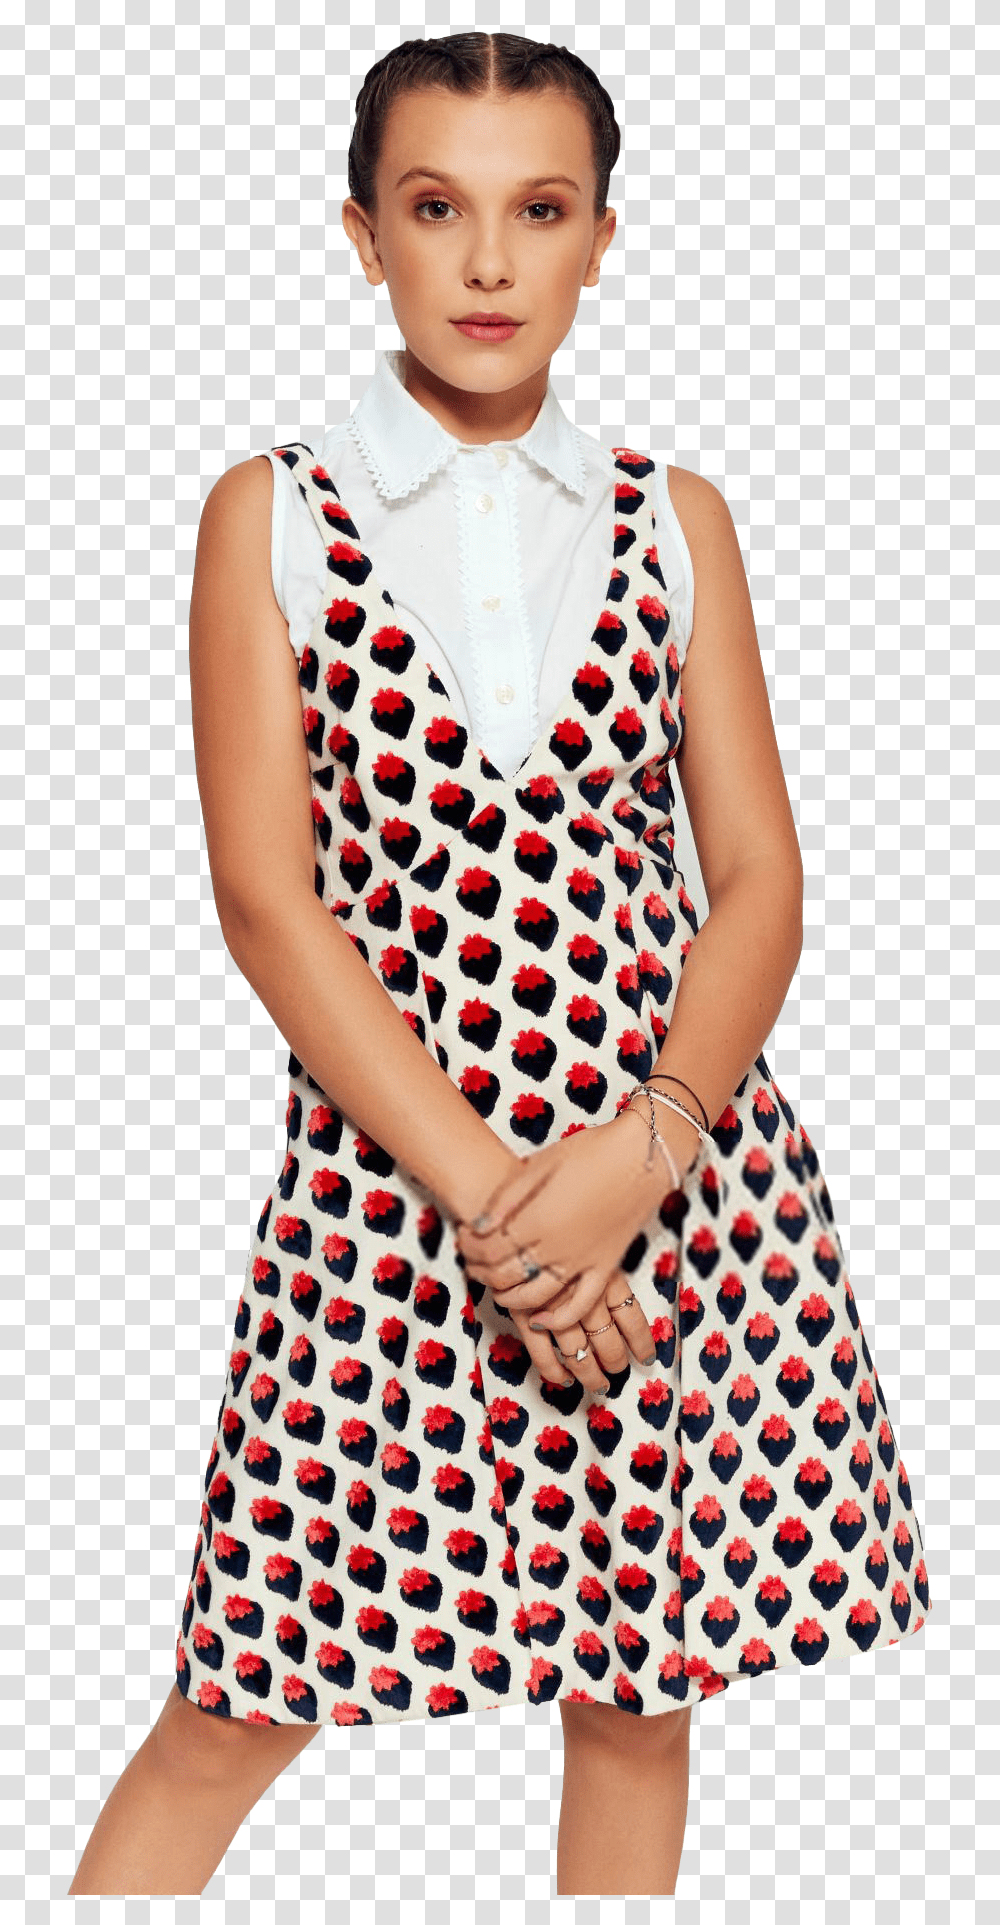 Find This Pin And More On Stranger Things Pngquots By Millie Bobby Brown Photoshoot, Skirt, Apparel, Texture Transparent Png